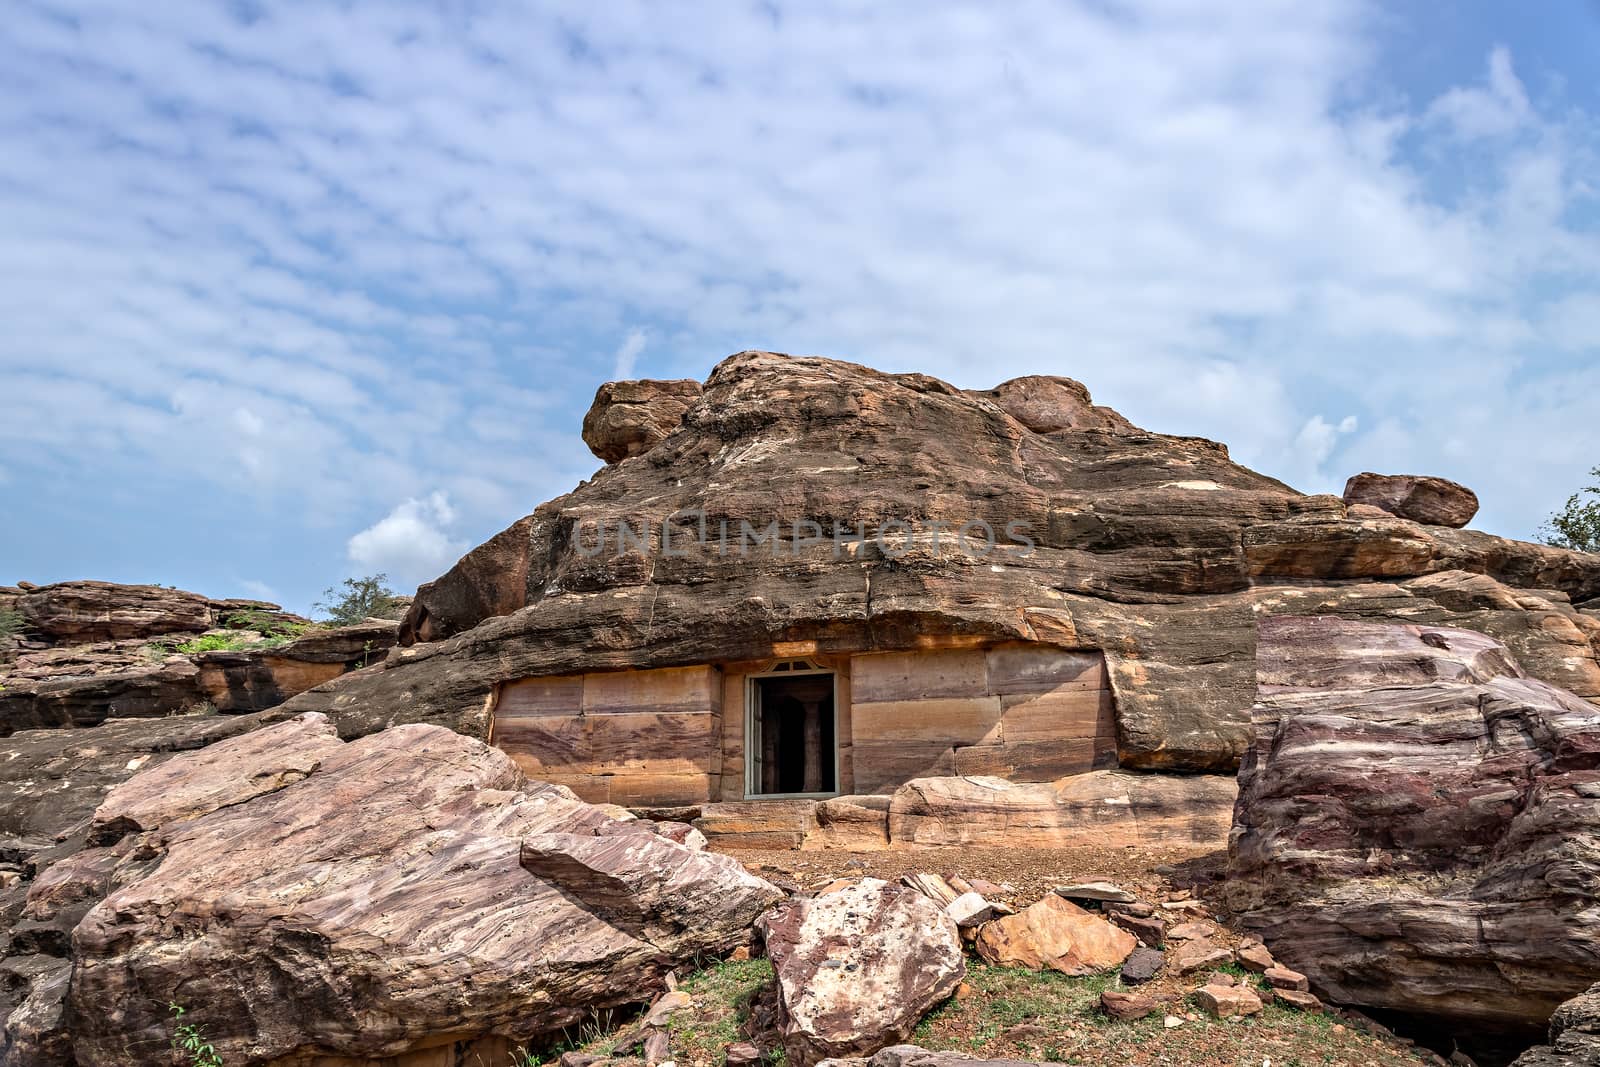 Jain cave temple in the south of Aihole village, on the Meguti hill,Karnataka,India. It is likely from the late 6th century or early 7th. The outside is plain, but the cave is intricately embellished inside.